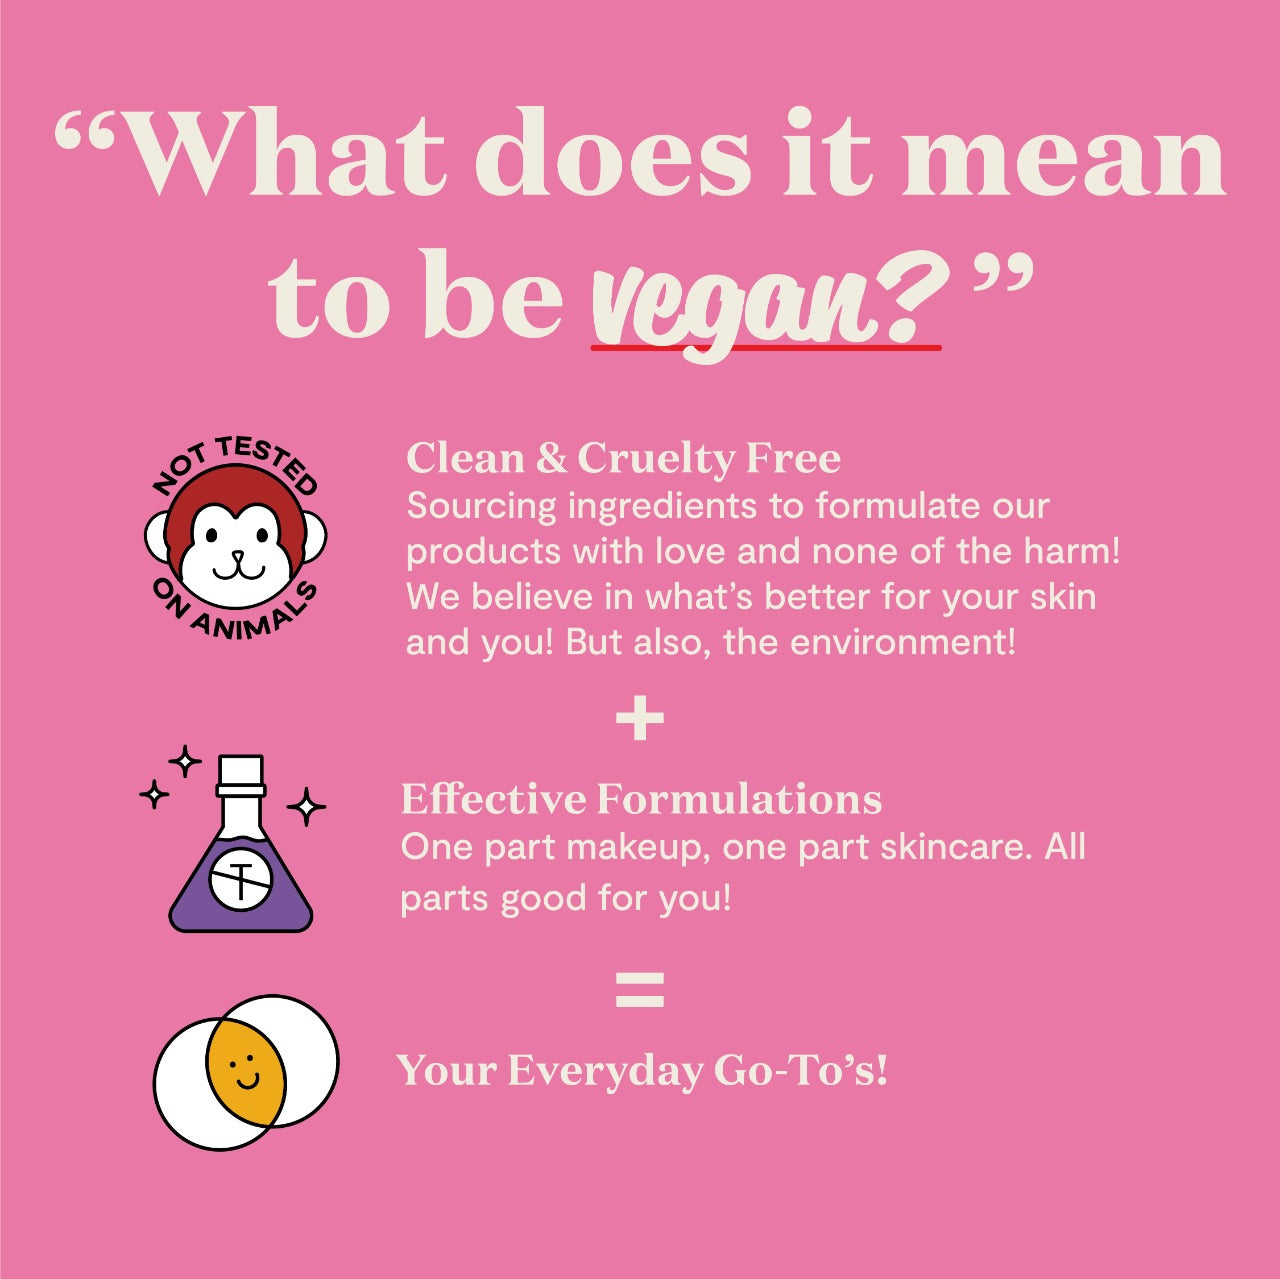 What Does Vegan Beauty Mean?